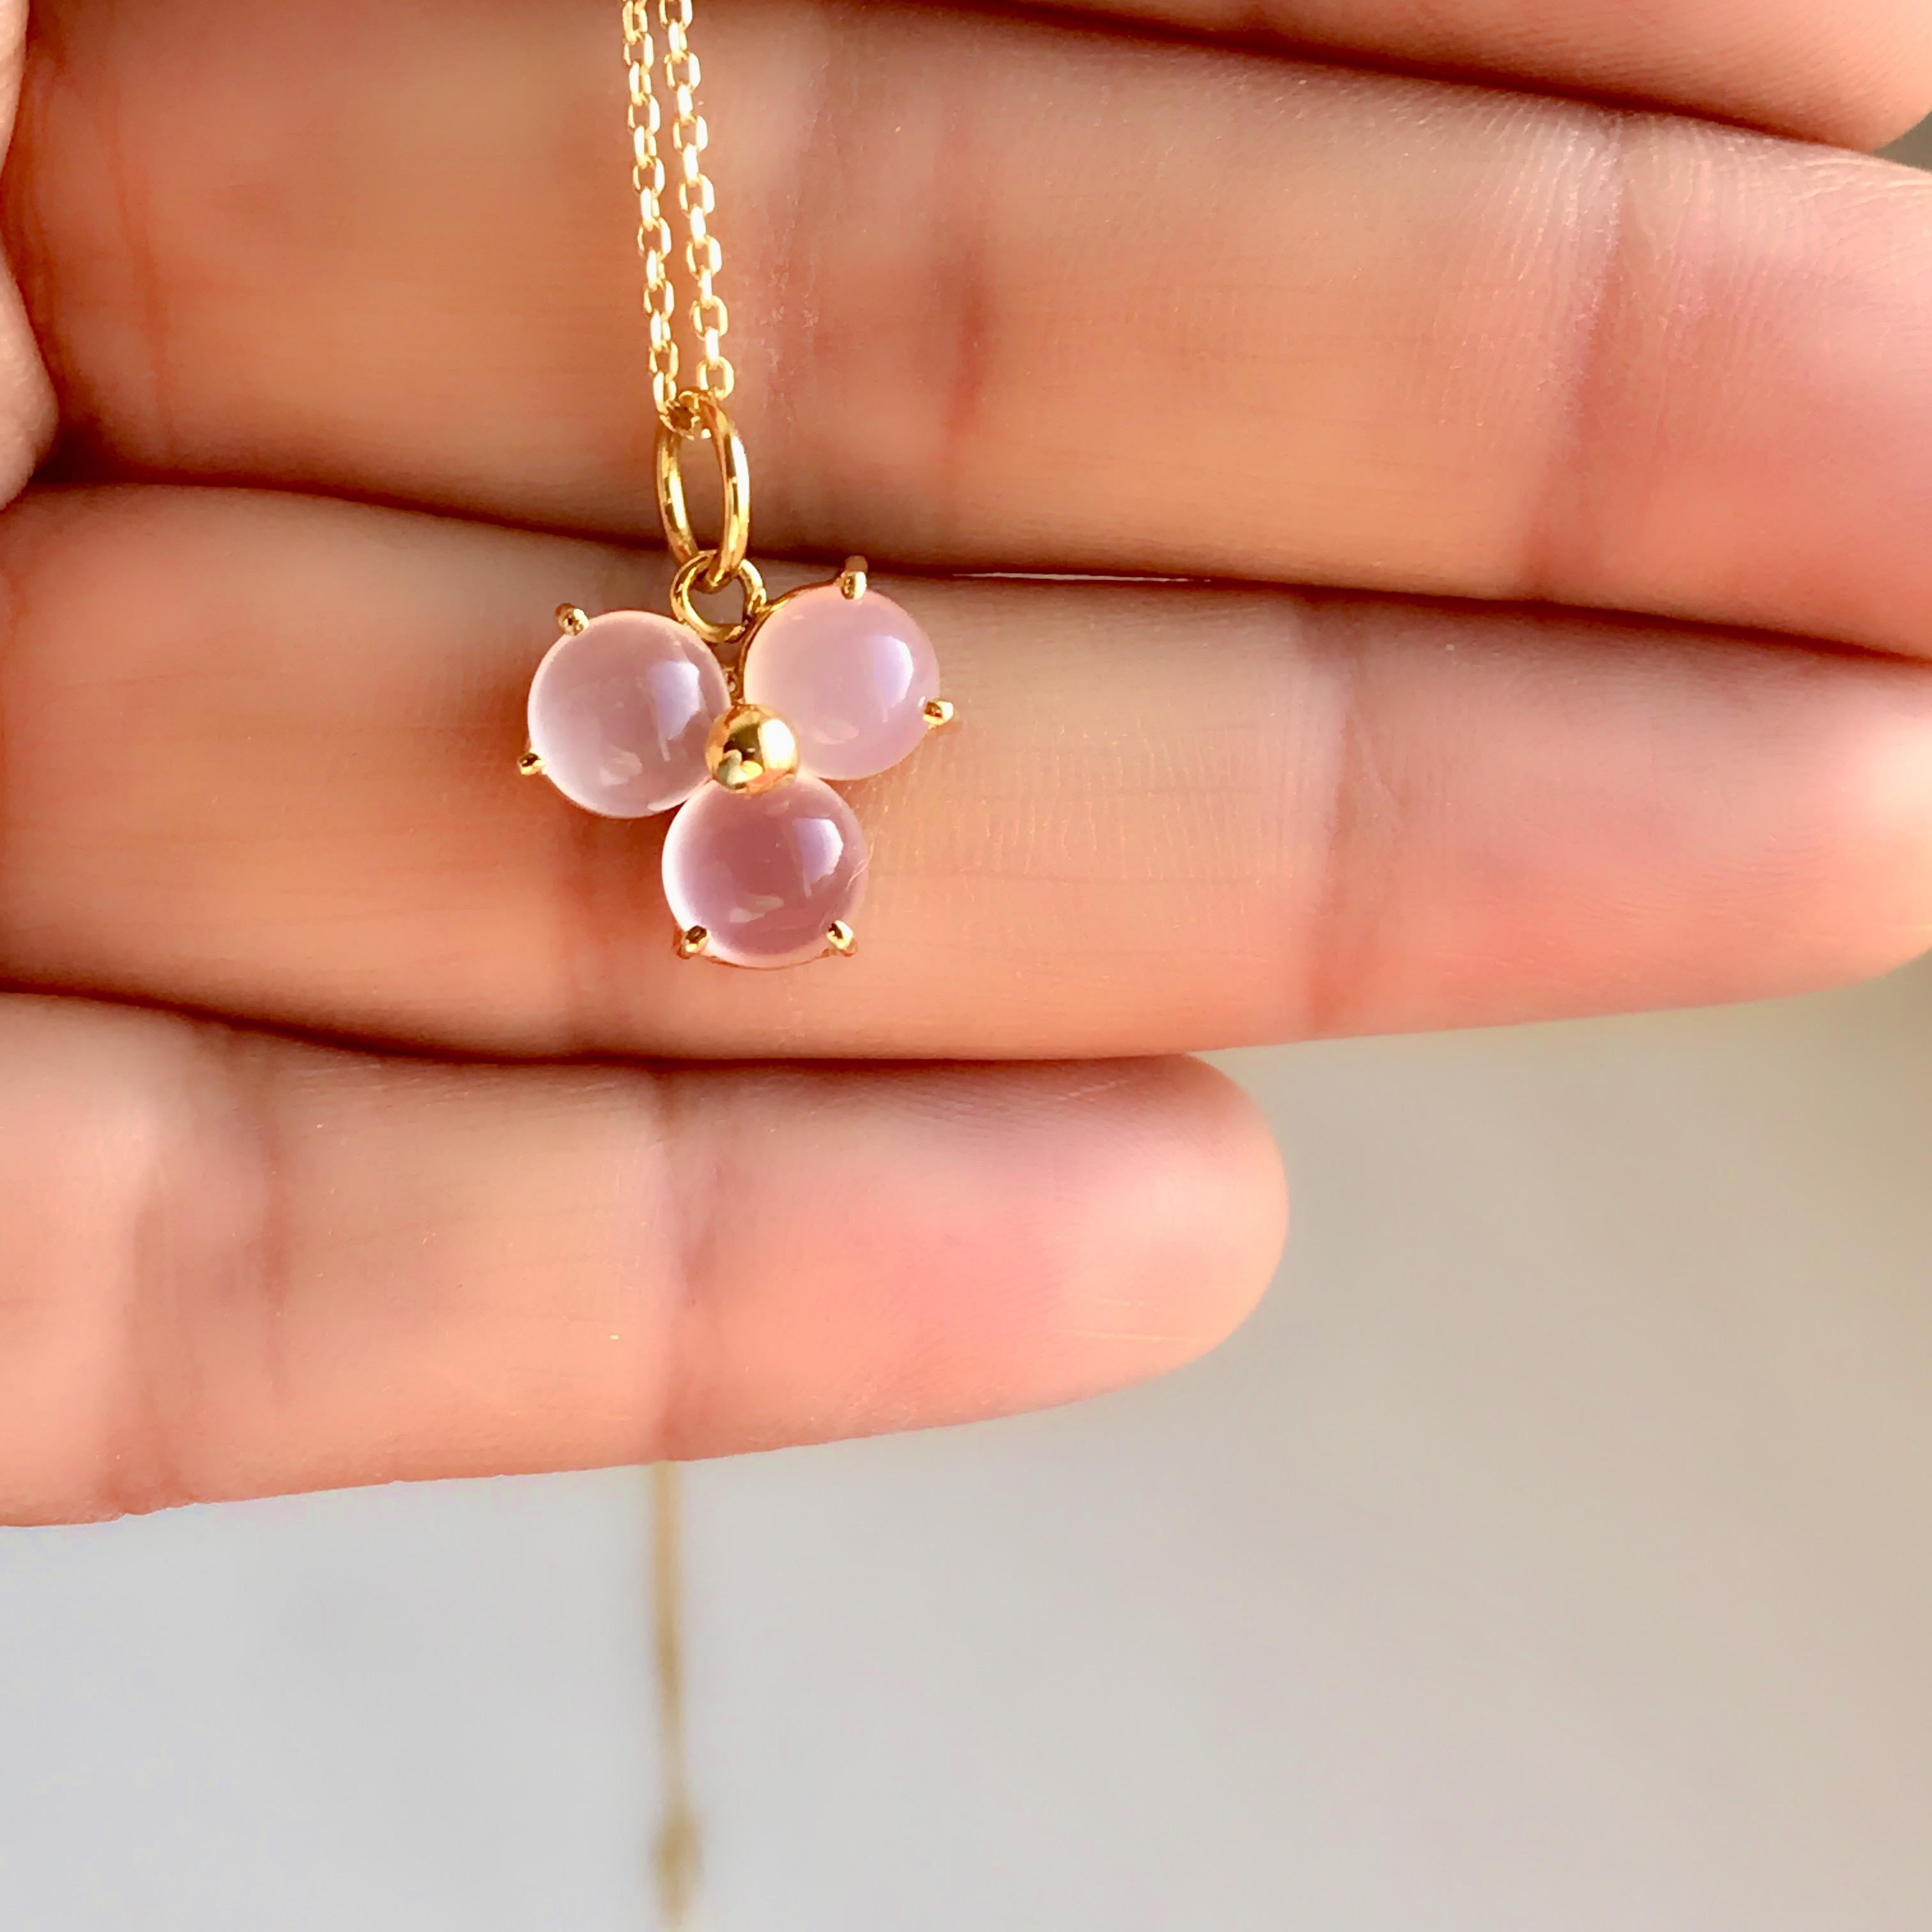 Women's 18 Karat Solid Yellow Gold Pink Blossom Flower Charm Pendant Chain Necklace For Sale